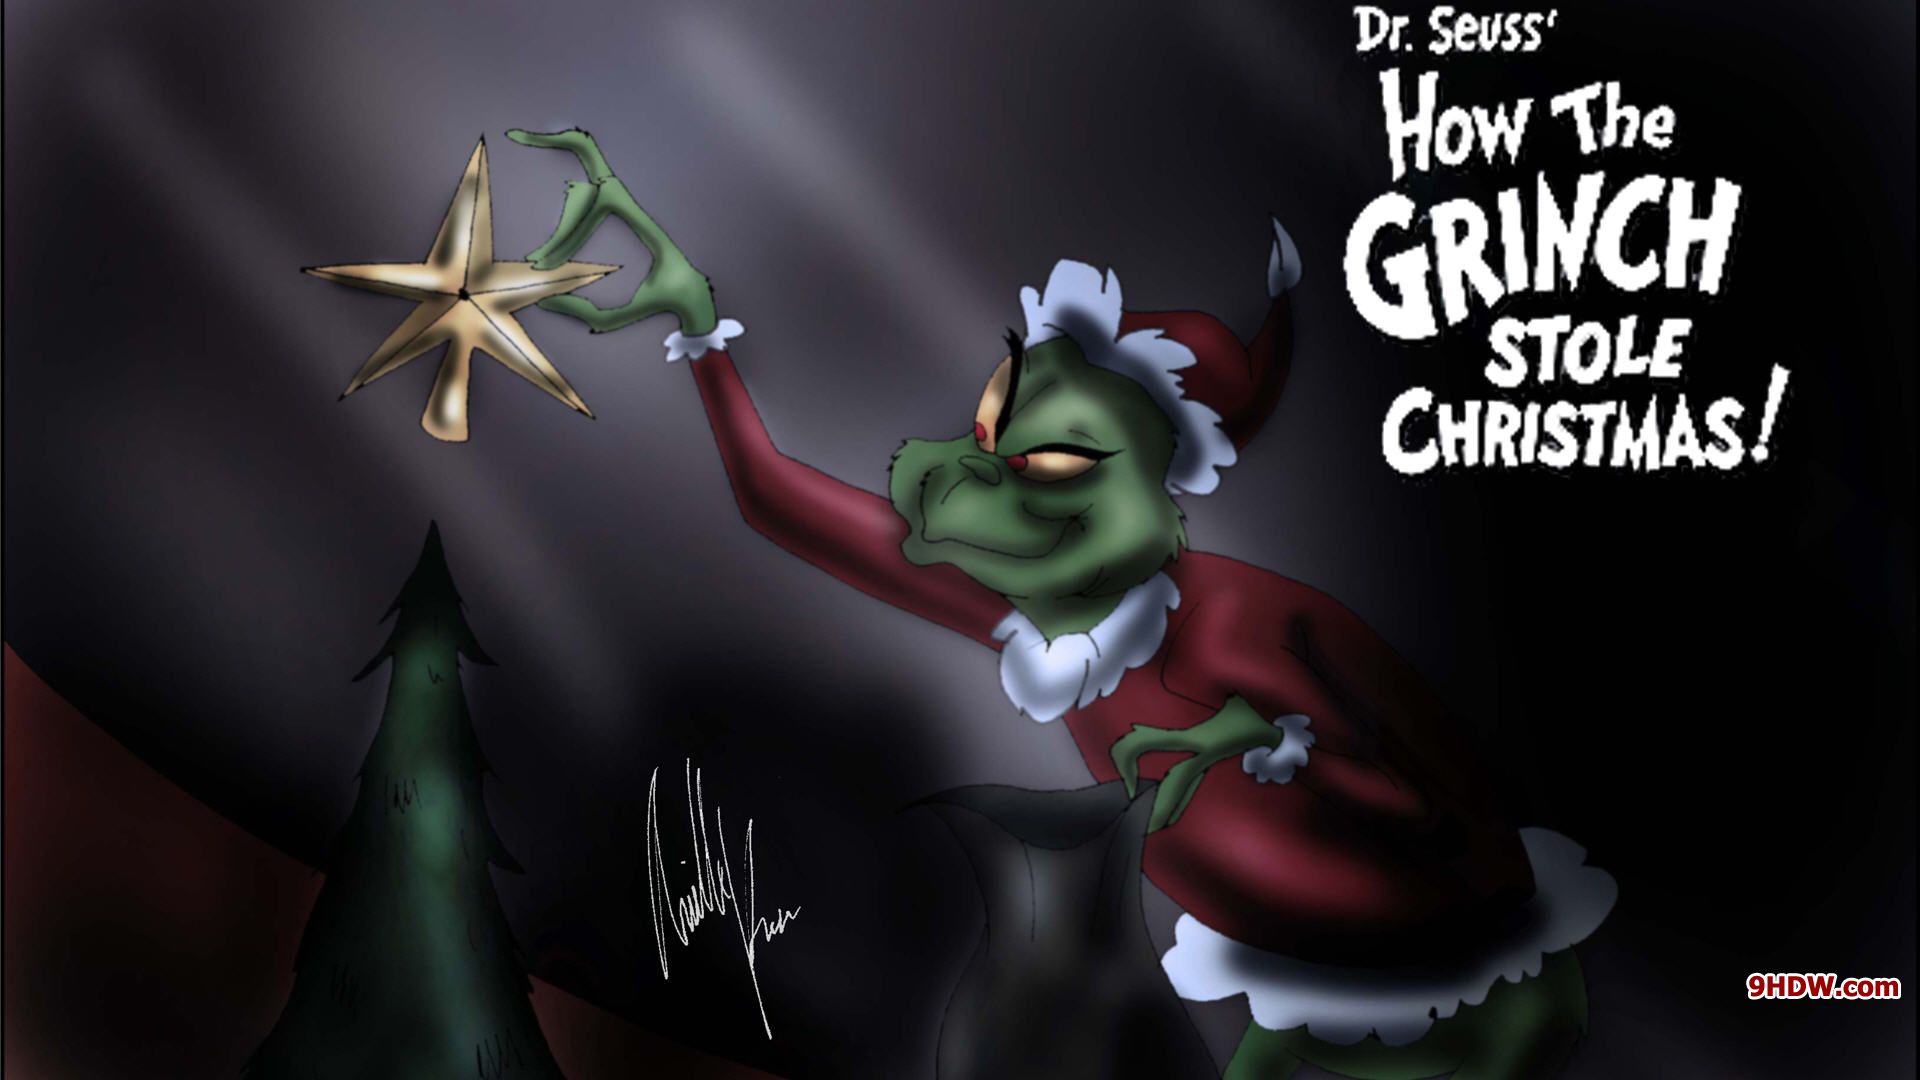 How The Grinch Stole Christmas Wallpaper HD 1920x1080 #2112